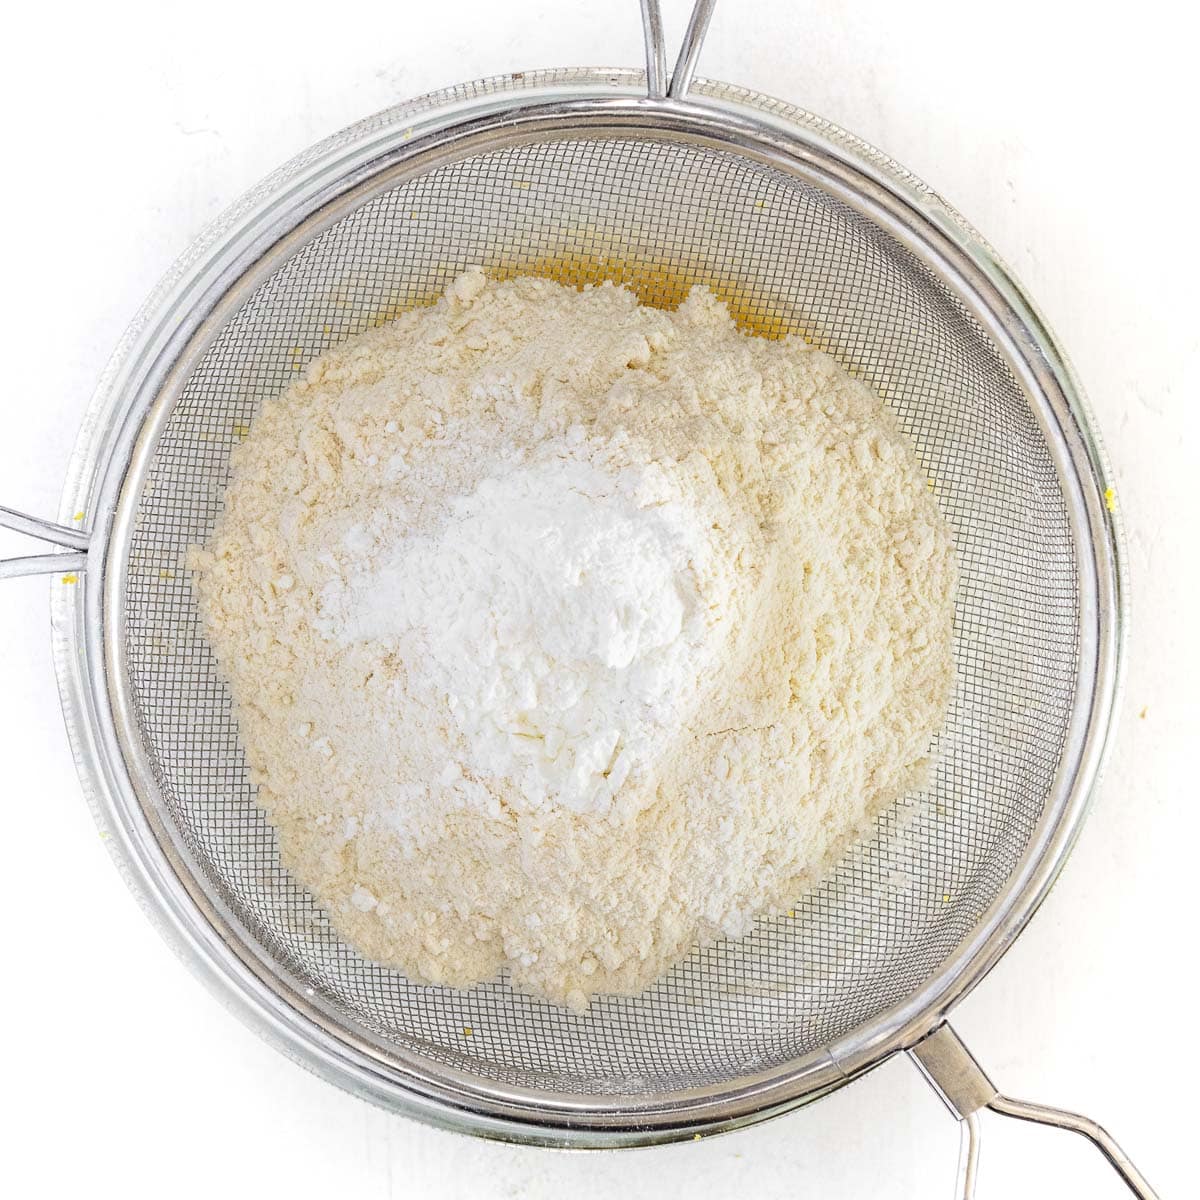 sifting flour and baking powder in the bowl